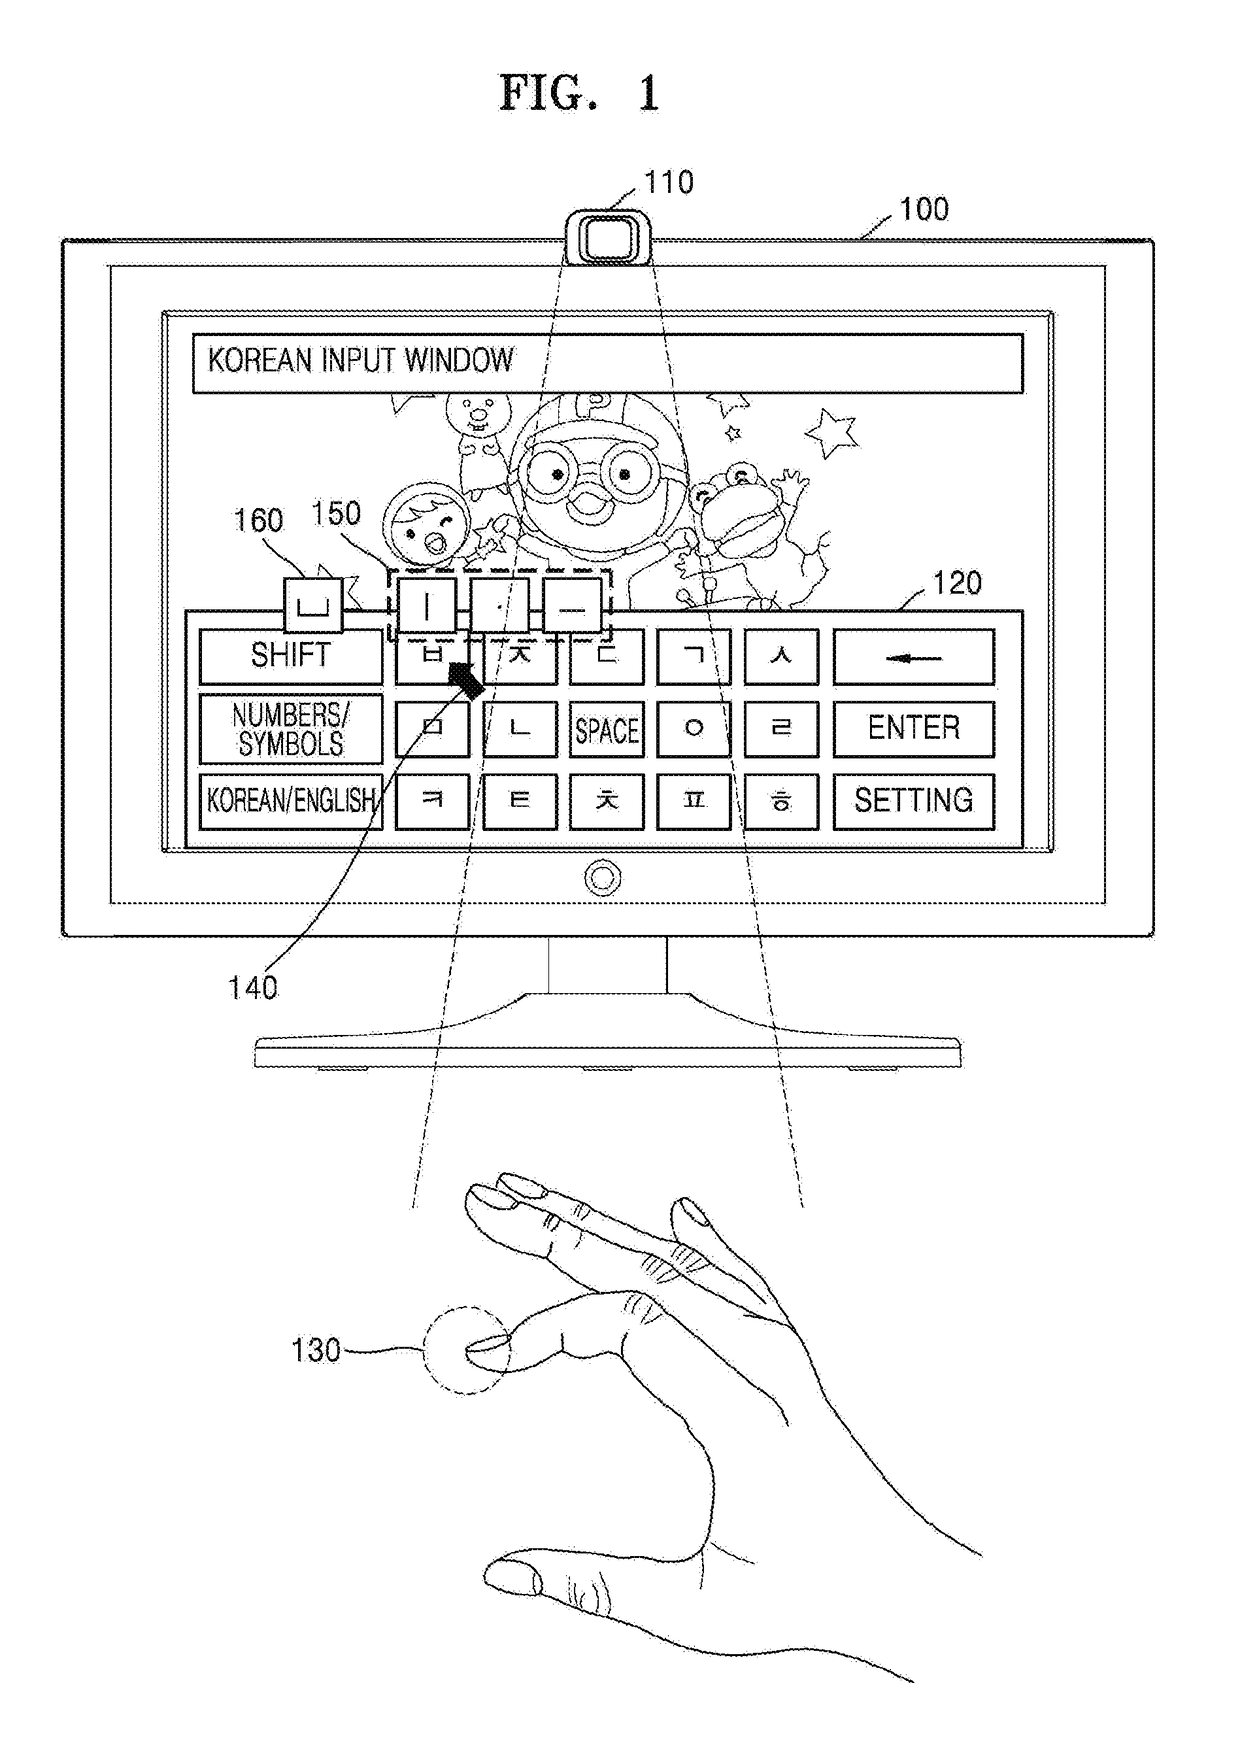 Method and device for inputting korean characters based on motion of fingers of user